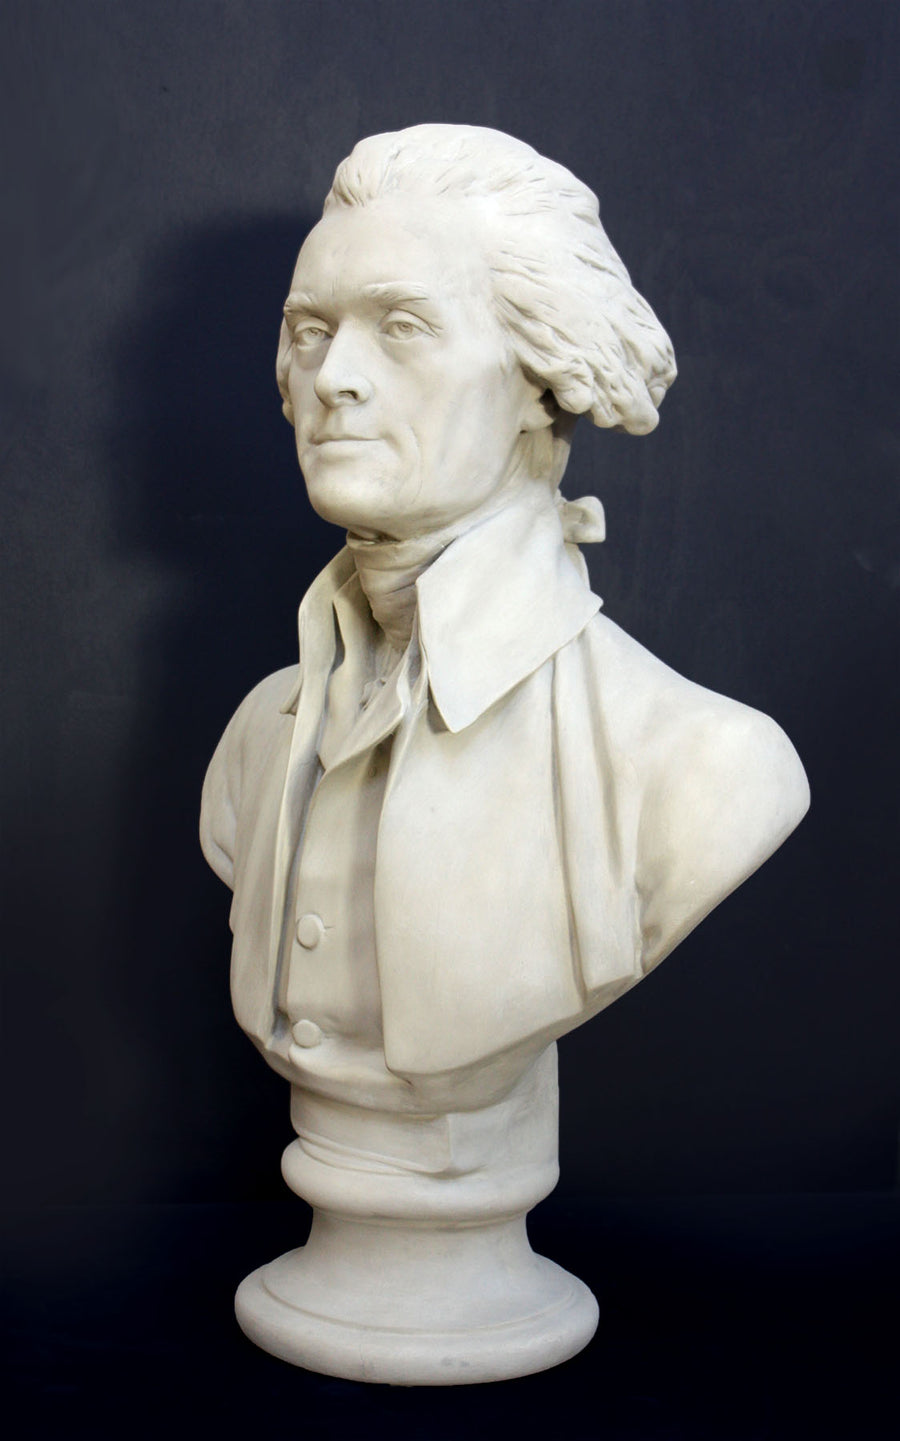 Photo of plaster cast bust sculpture of man with coat and neckerchief, namely Thomas Jefferson, with dark gray background